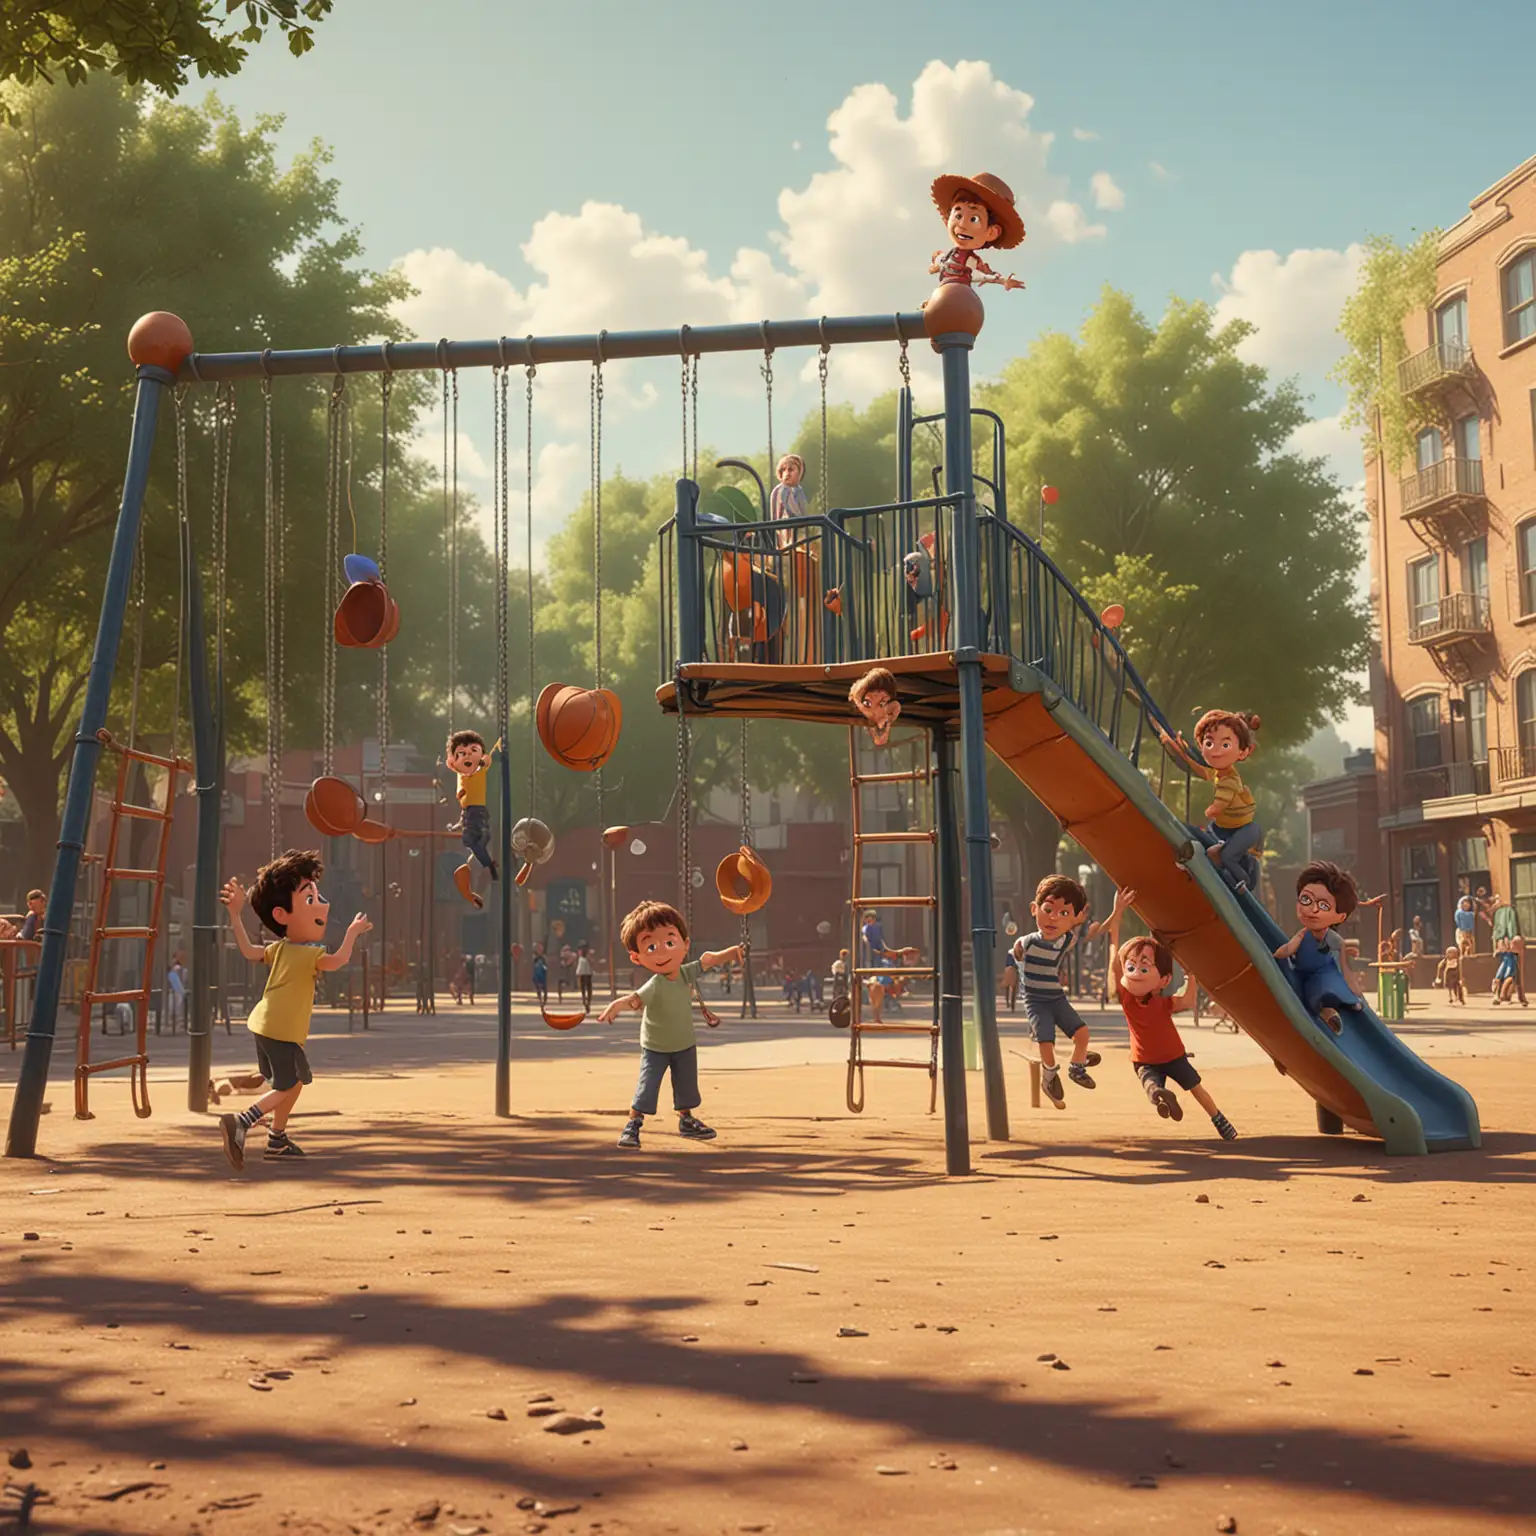 Energetic Children Playing on a Vibrant Playground Pixar Style Fun